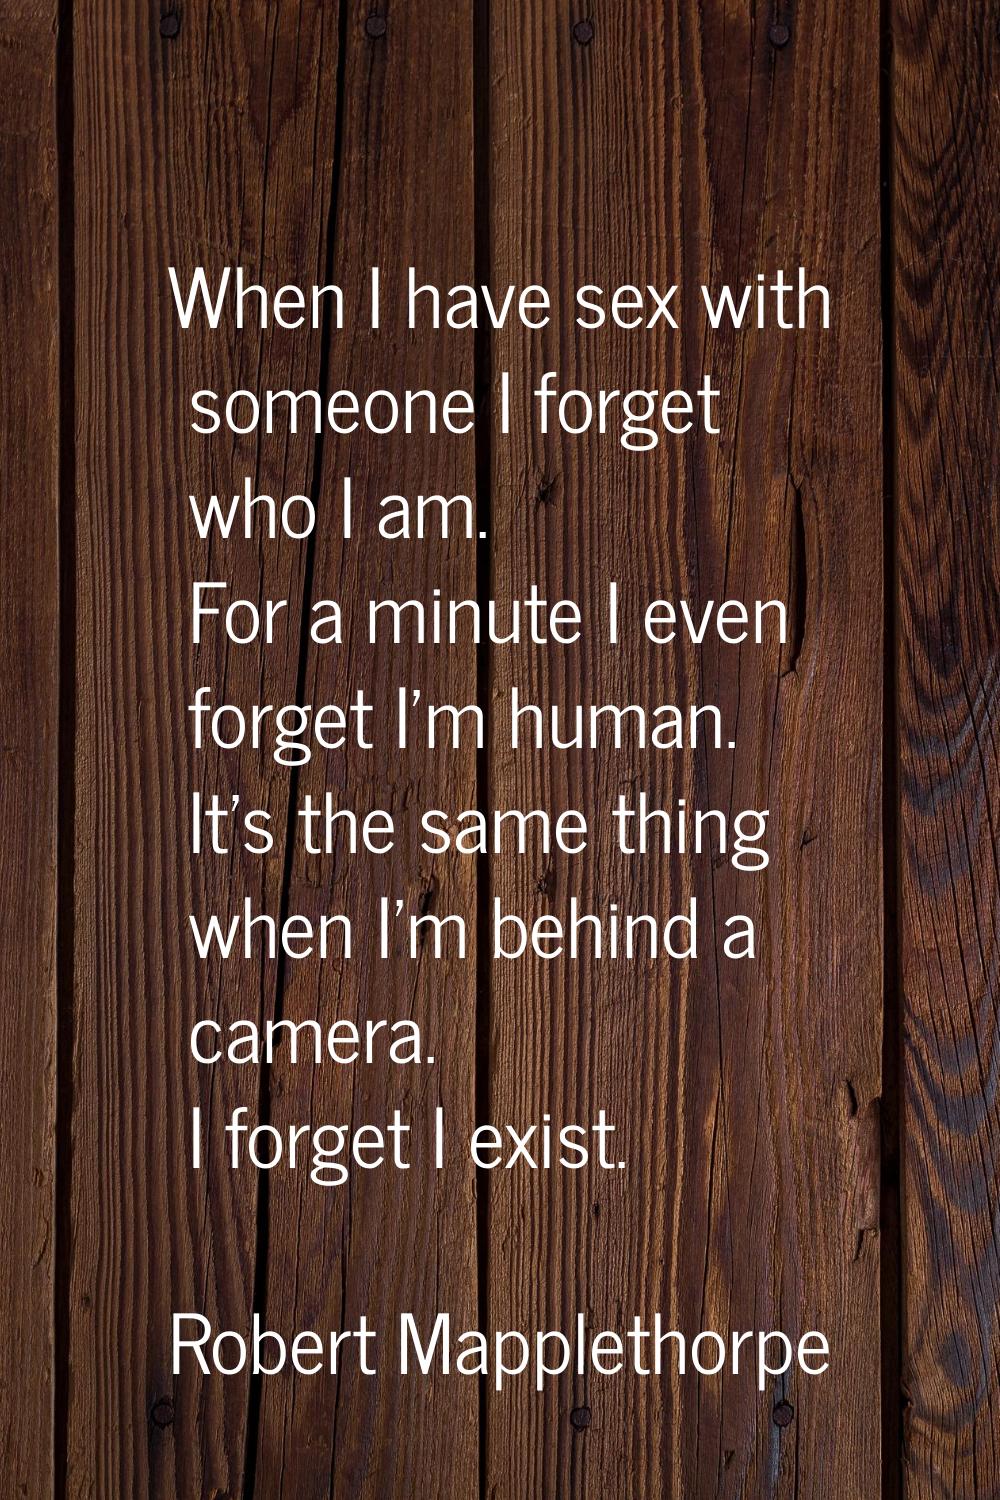 When I have sex with someone I forget who I am. For a minute I even forget I'm human. It's the same